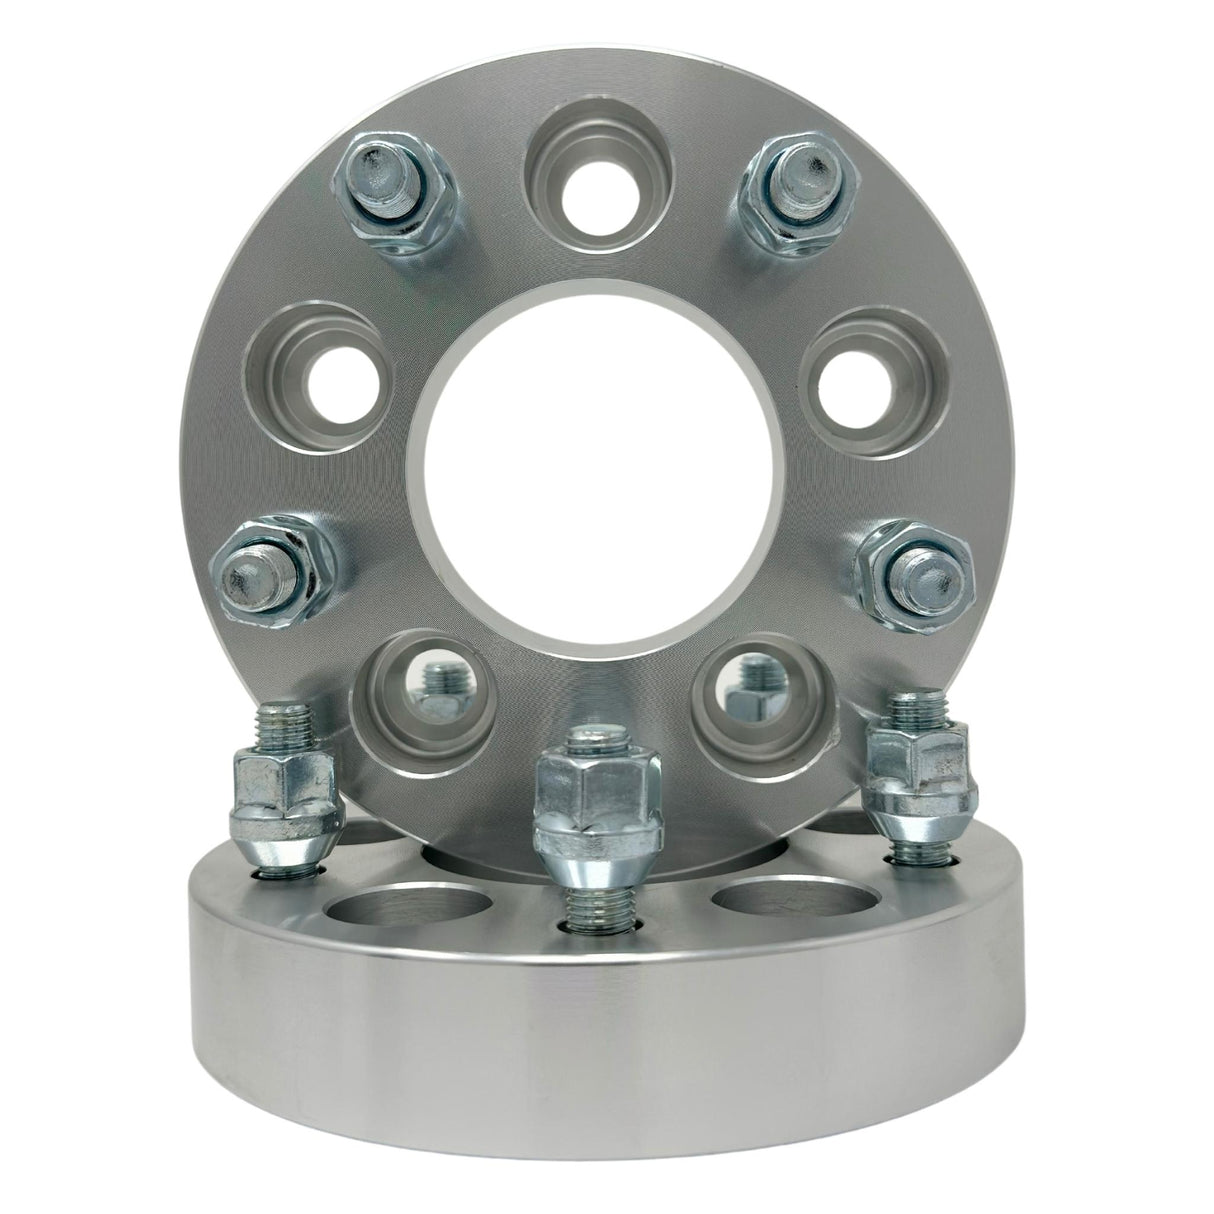 5x5 to 5x4.5 Wheel Adapters 1.25" Inch (32mm) 12x1.5 Studs & Lug Nuts 74mm Center Bore | 5x127 to 5x114.3